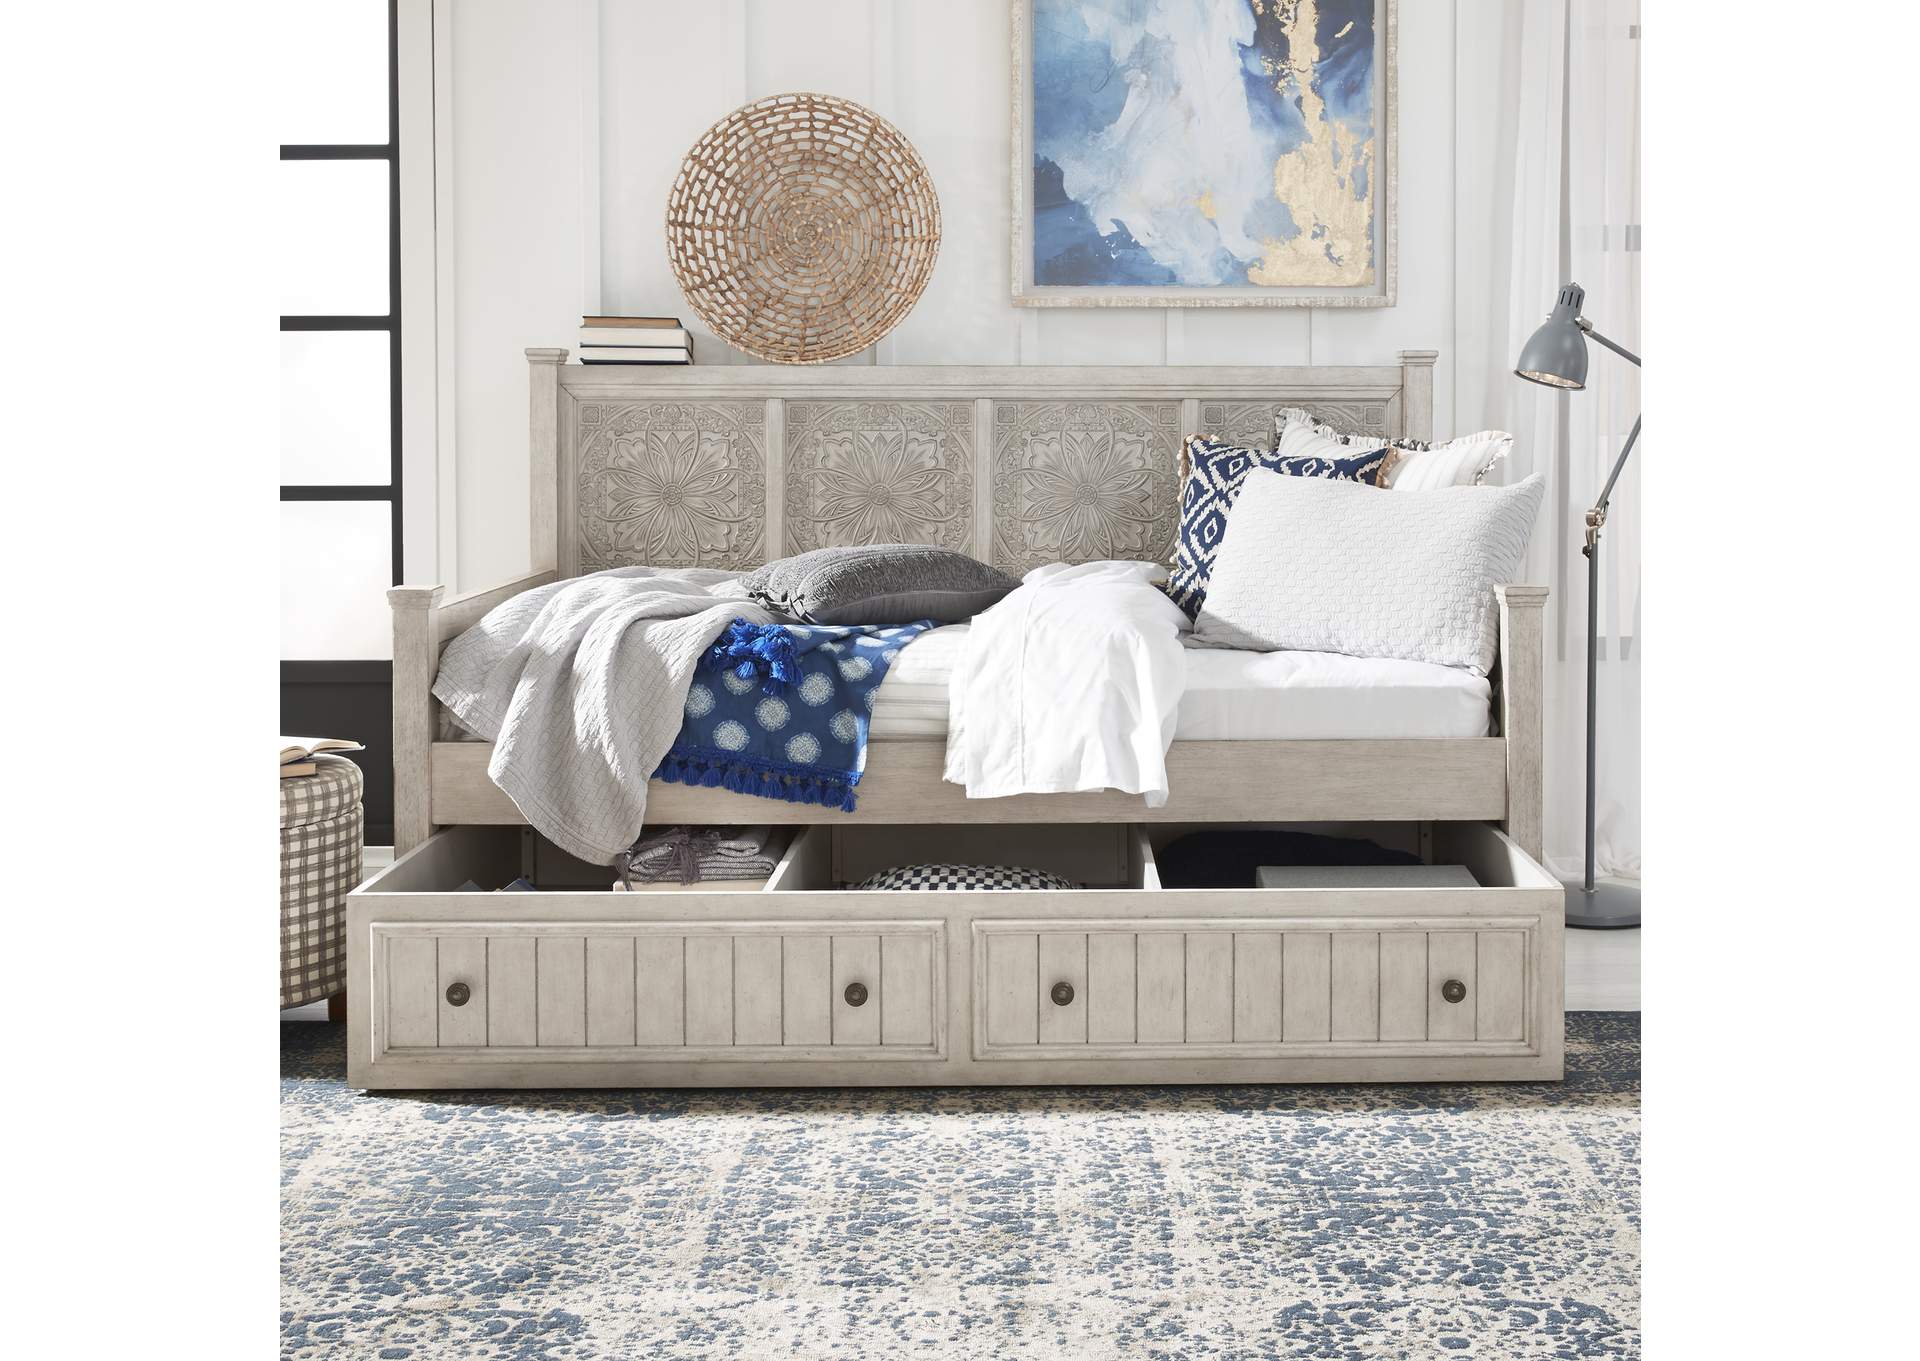 Heartland Antique White Twin Trundle, Antique White Twin Bedroom Set